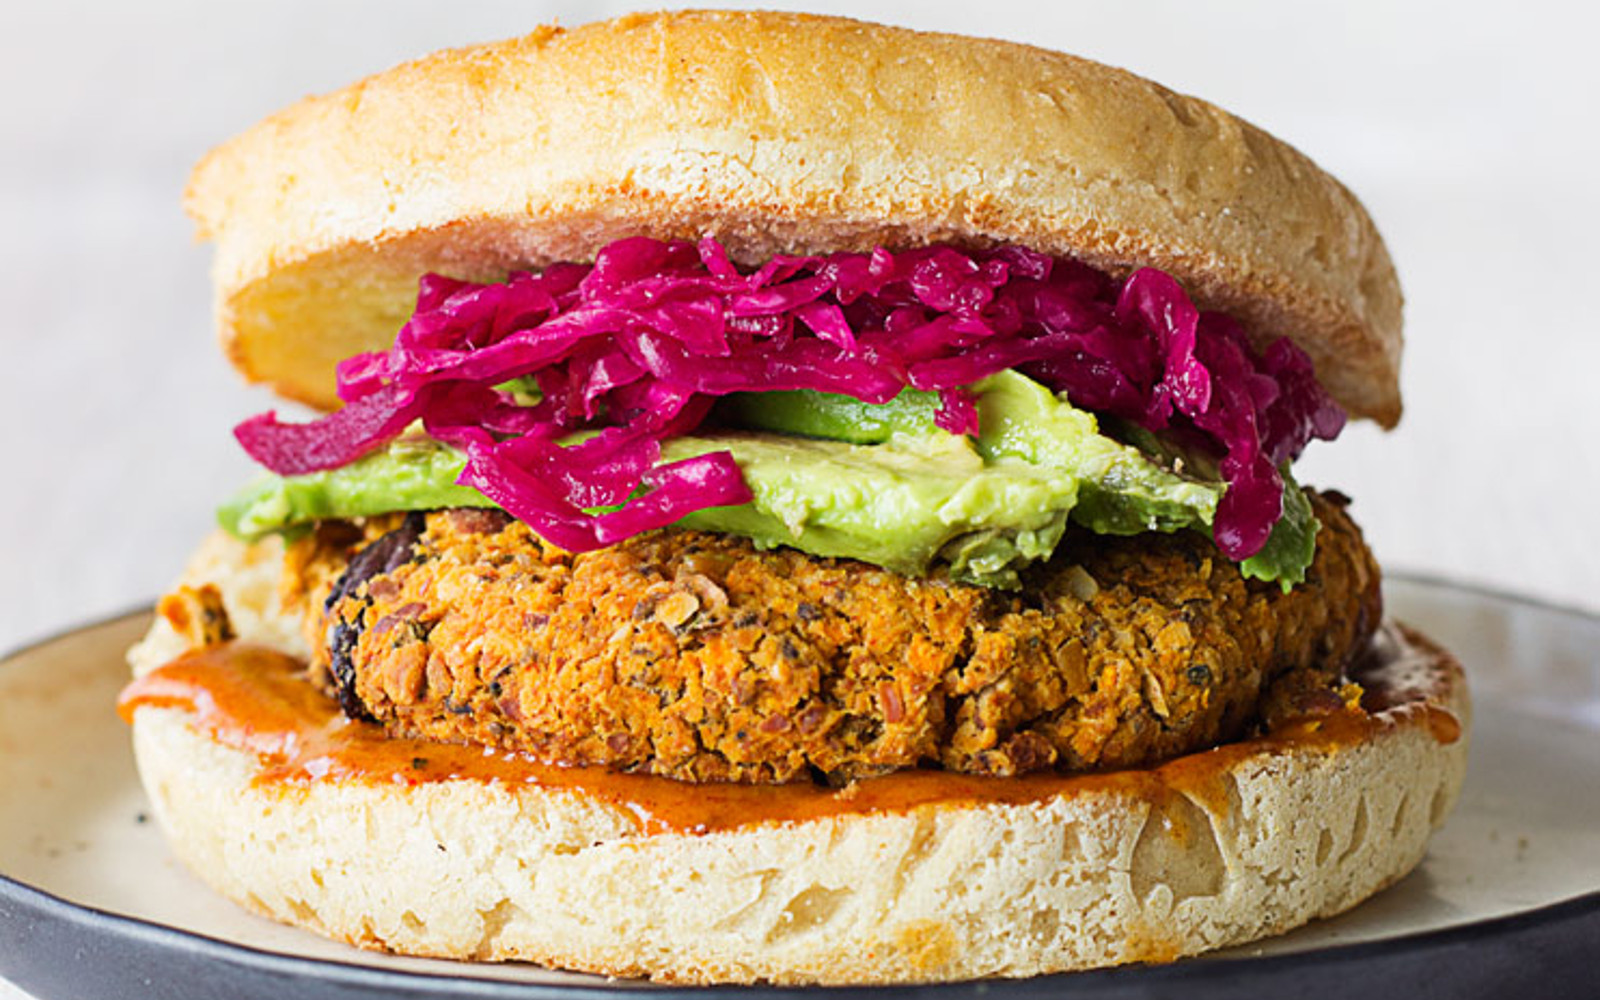 Almond Carrot and Chickpea Burger